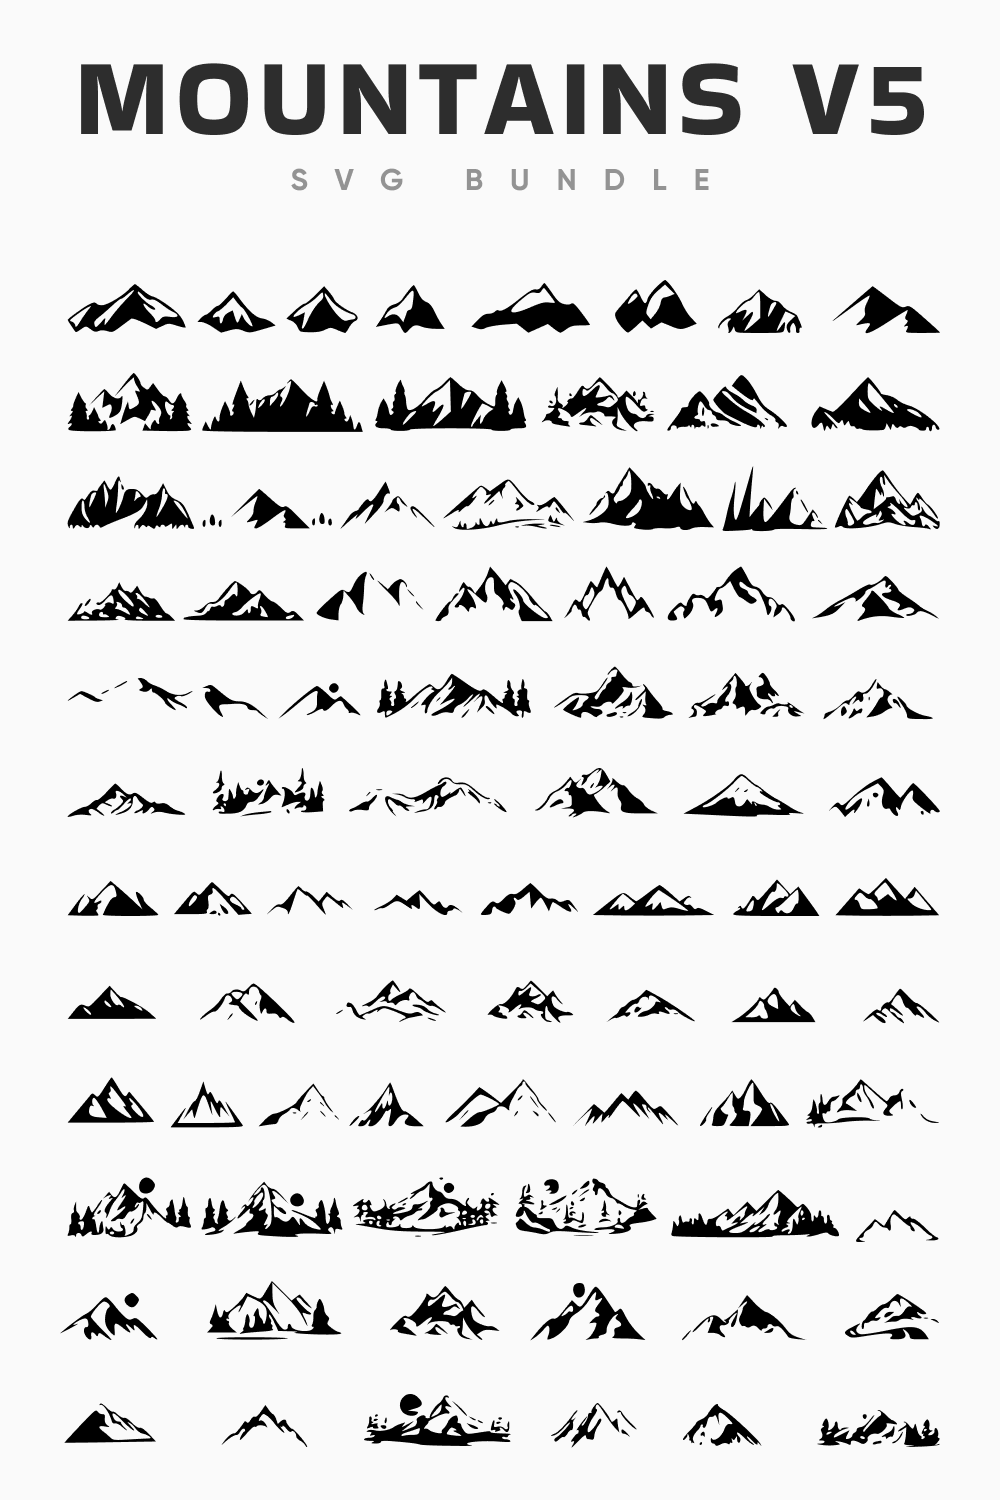 Mountains of different kinds in a large number of logos.